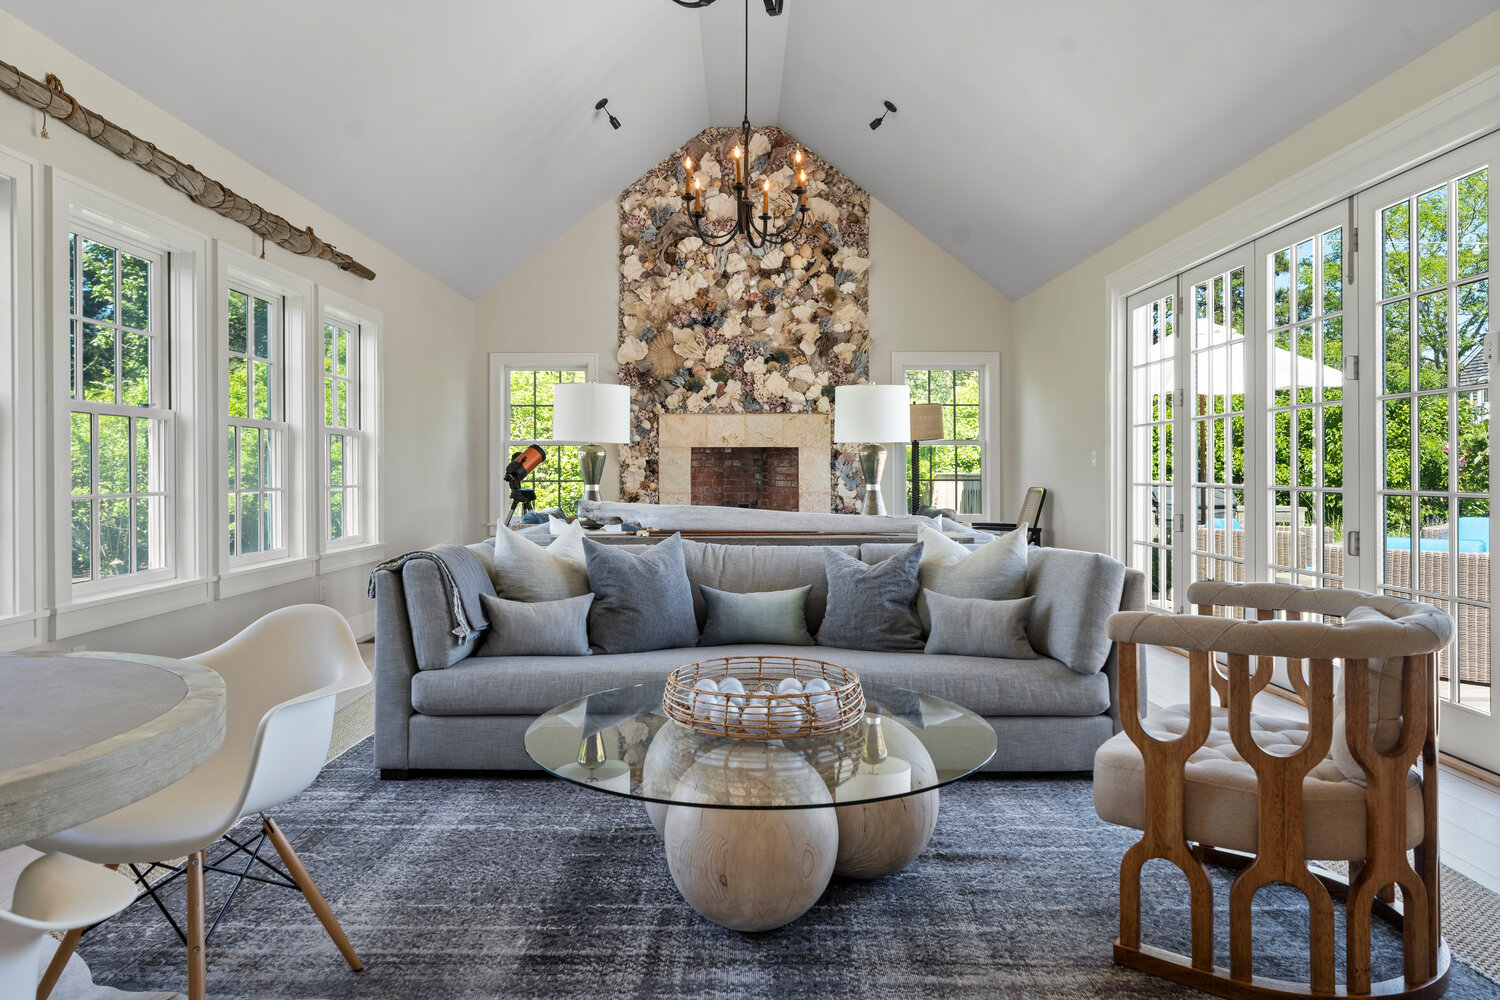 The living room has a vaulted ceiling, multiple windows and a dramatic fireplace with a floor-to-ceiling shell surround.